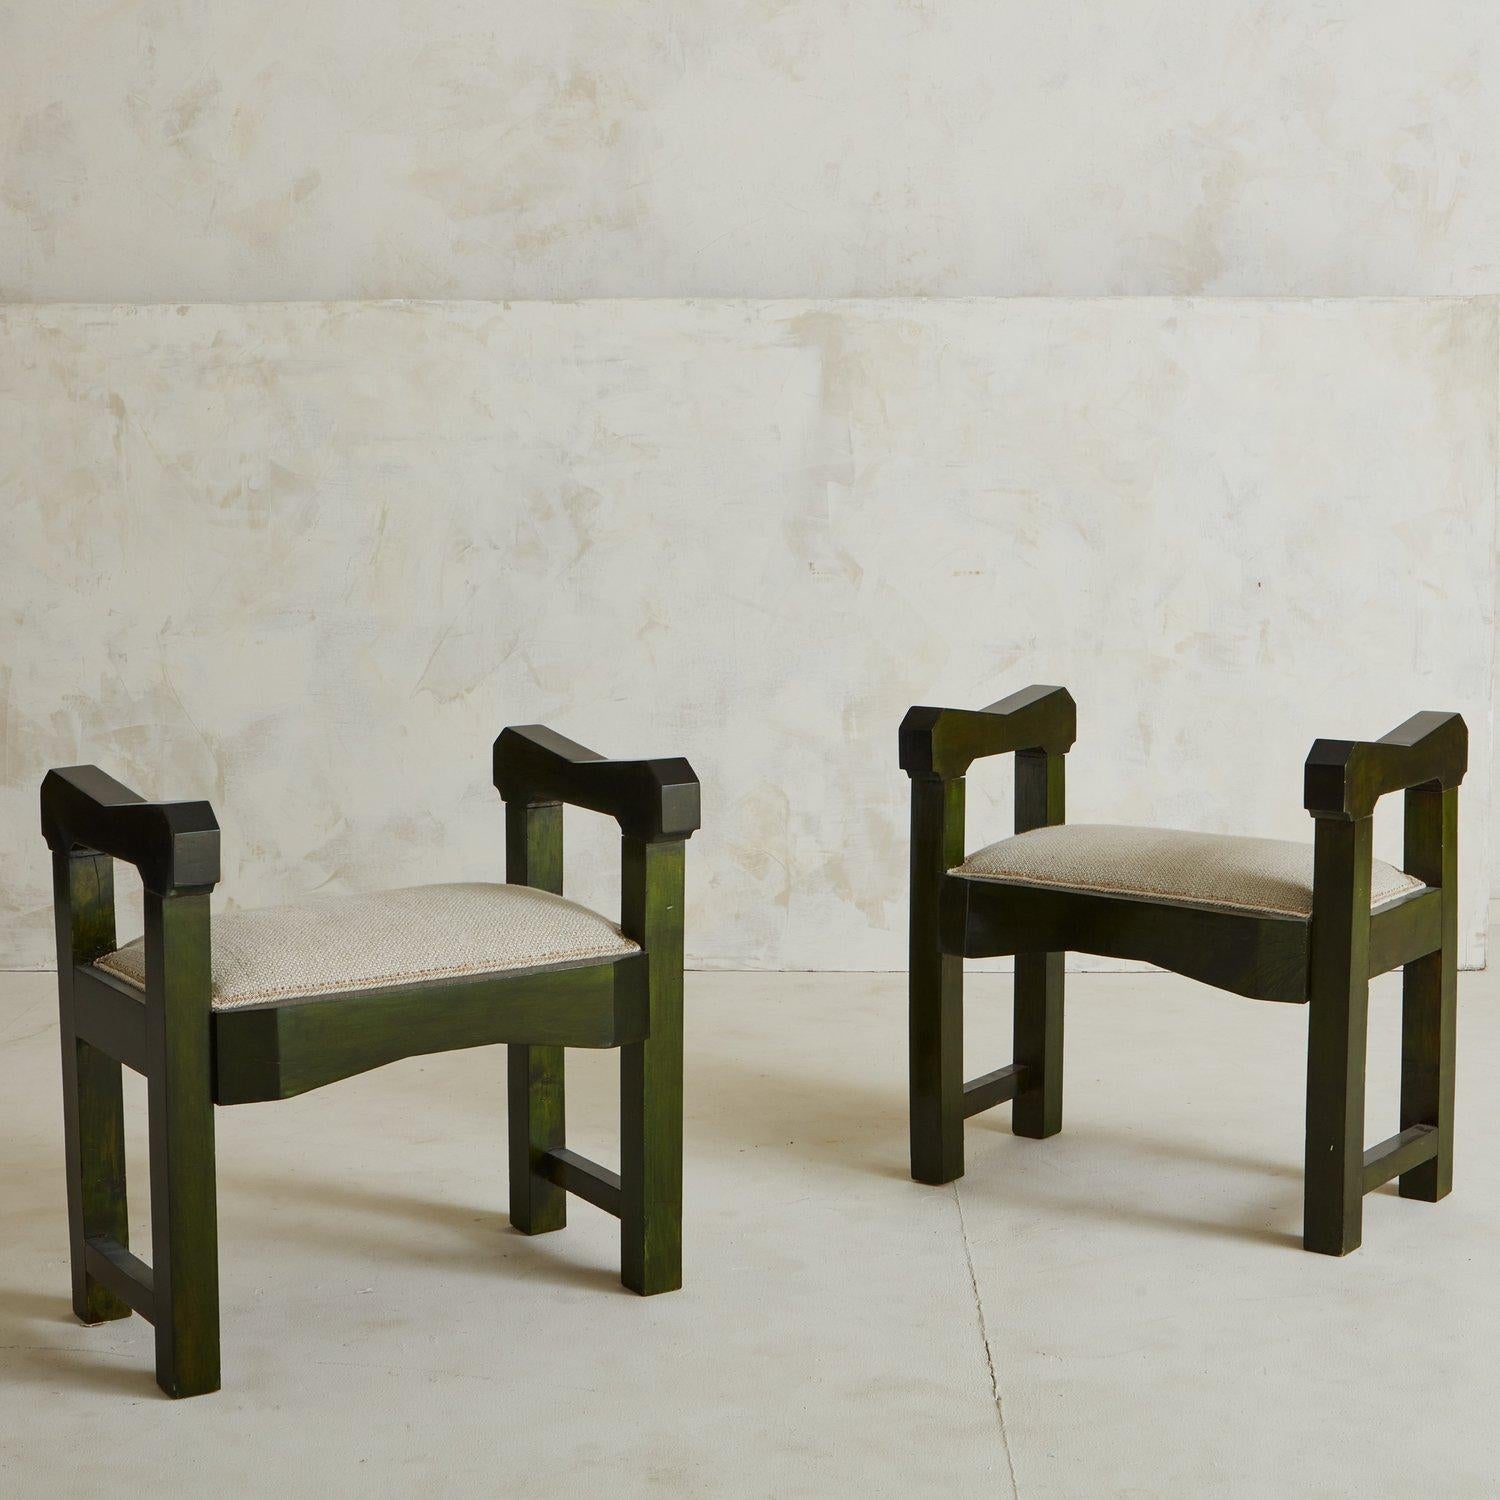 A unique stool in a green-stained cherry wood and upholstered seat in the style of Giacomo Cometti. The carved wood show off a distinct craftmanship, creating an understated but distinguished design. Italy, 1930s. Three available, priced